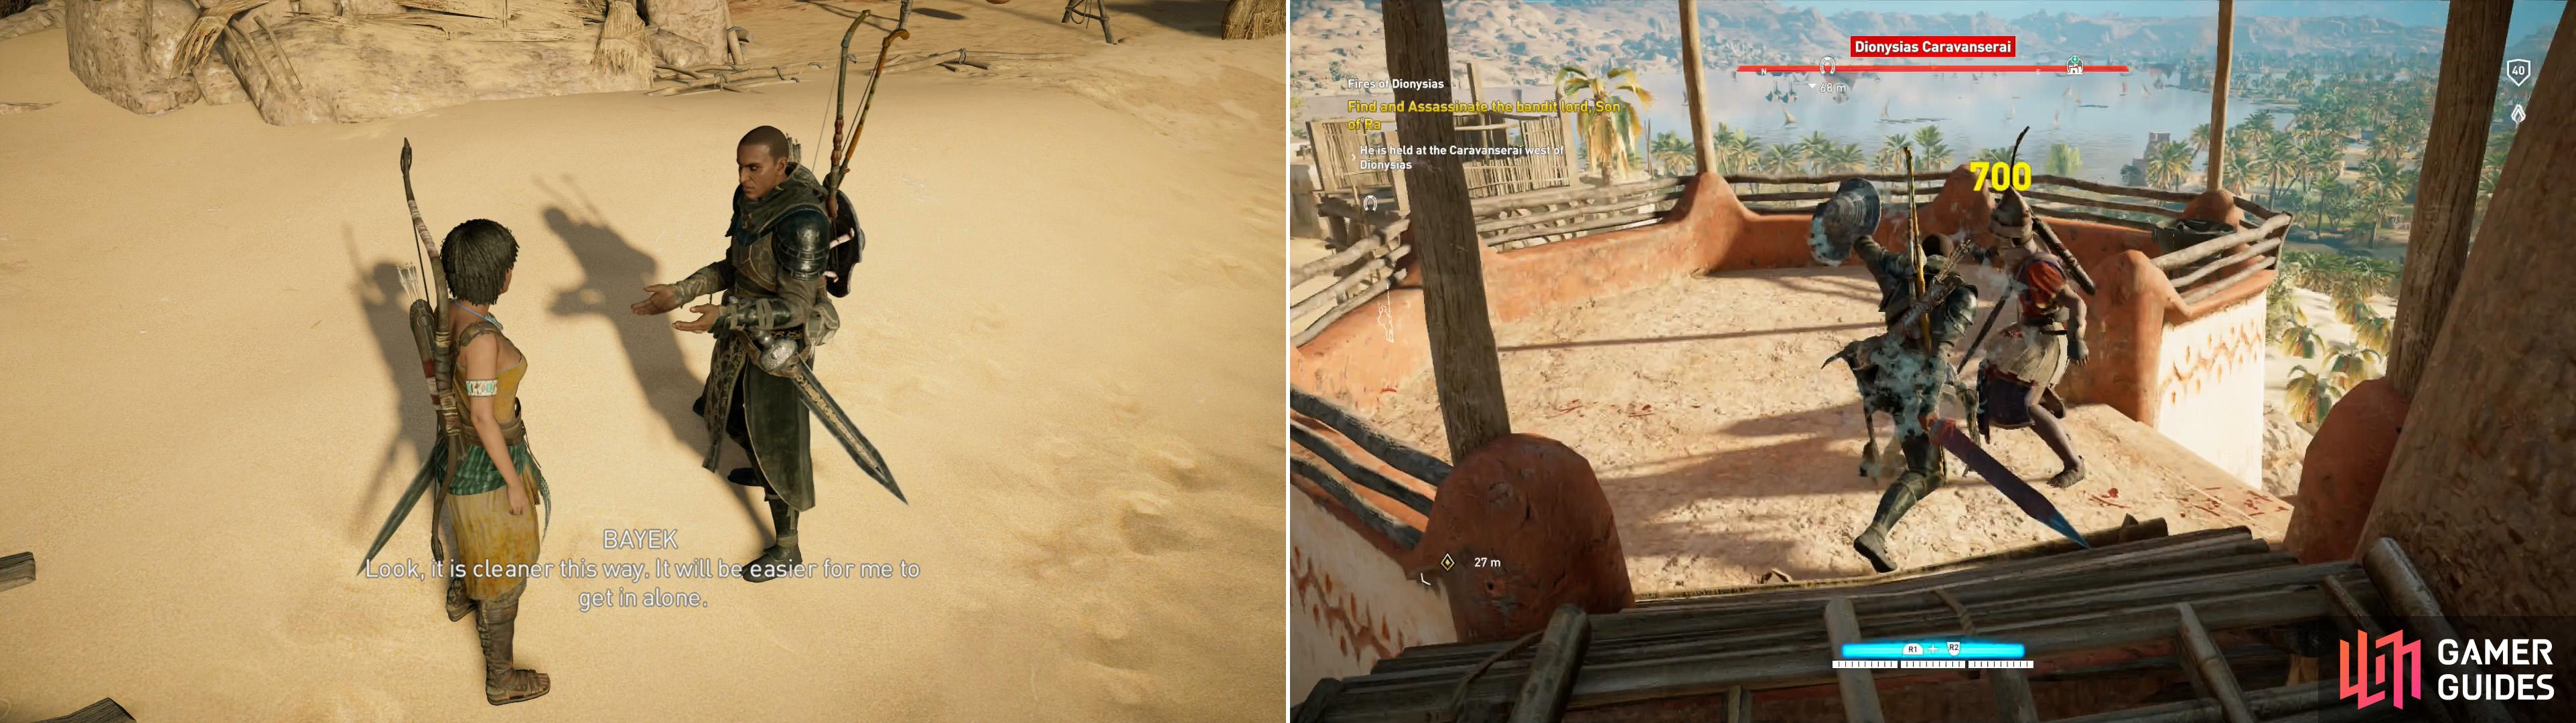 Bayek talks some sense into Zahra (left) which allows you to inflitrate the Dionysias Caravanserai on your own (right).